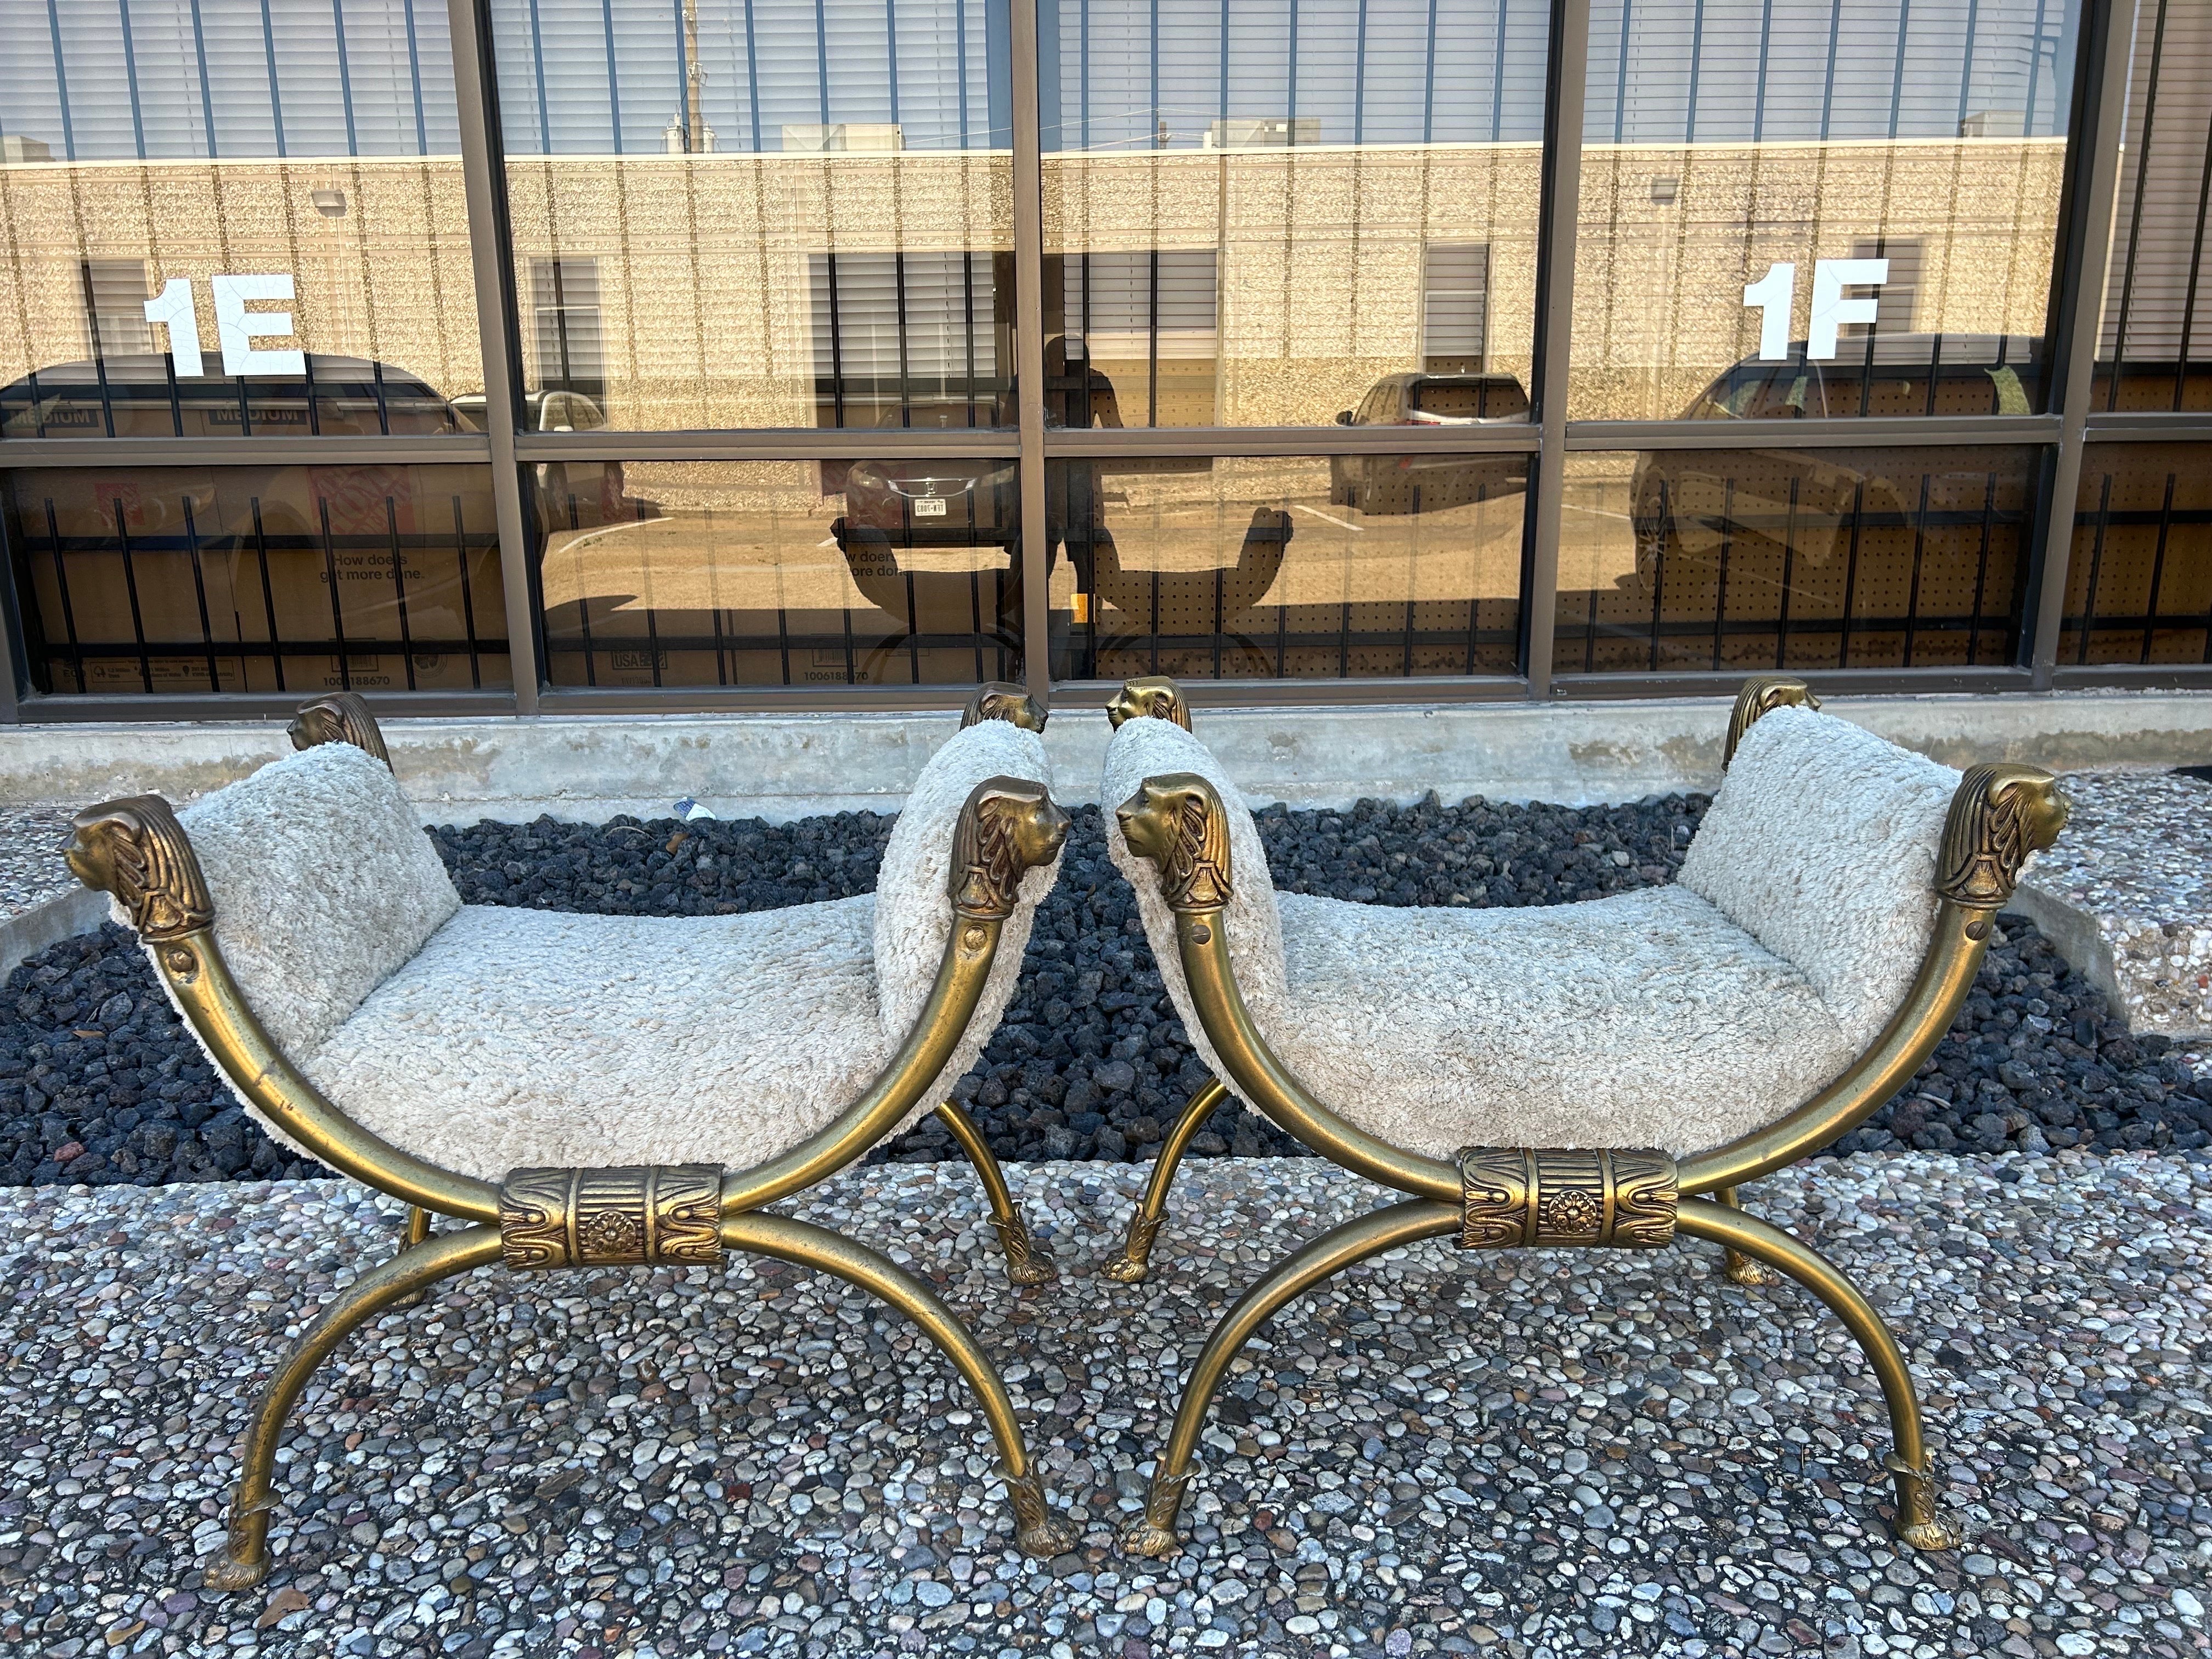 Pair Of Italian Brass Curule Benches With Lions Heads.
This great pair of antique Italian brass curule benches feature 4 lion's heads and paw feet. They have been taken down to the frame and newly upholstered in plush neutral lambs wool type